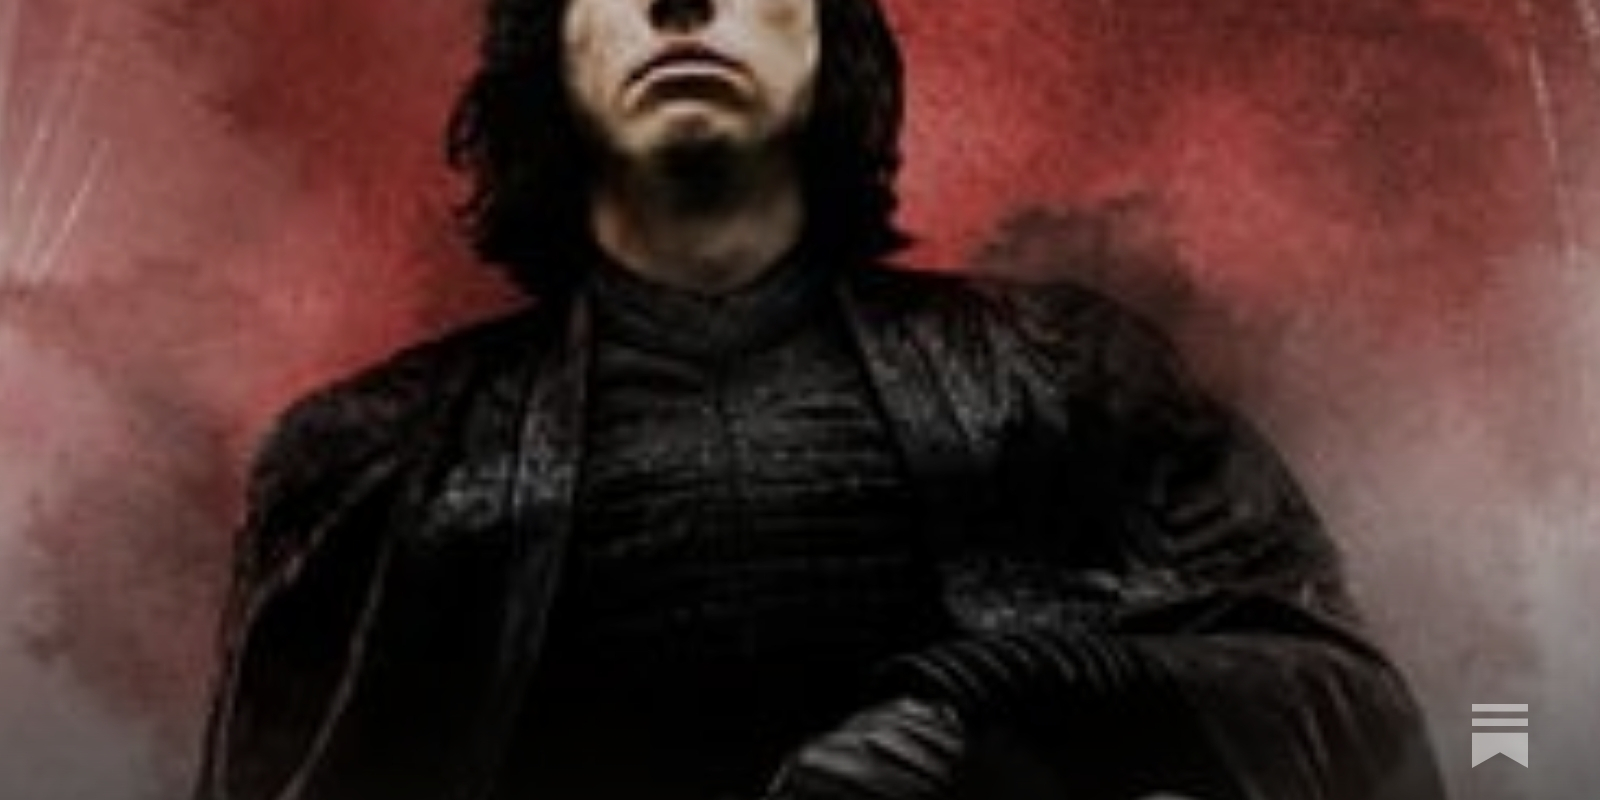 My Correct Views on The Last Jedi - by Ross Douthat